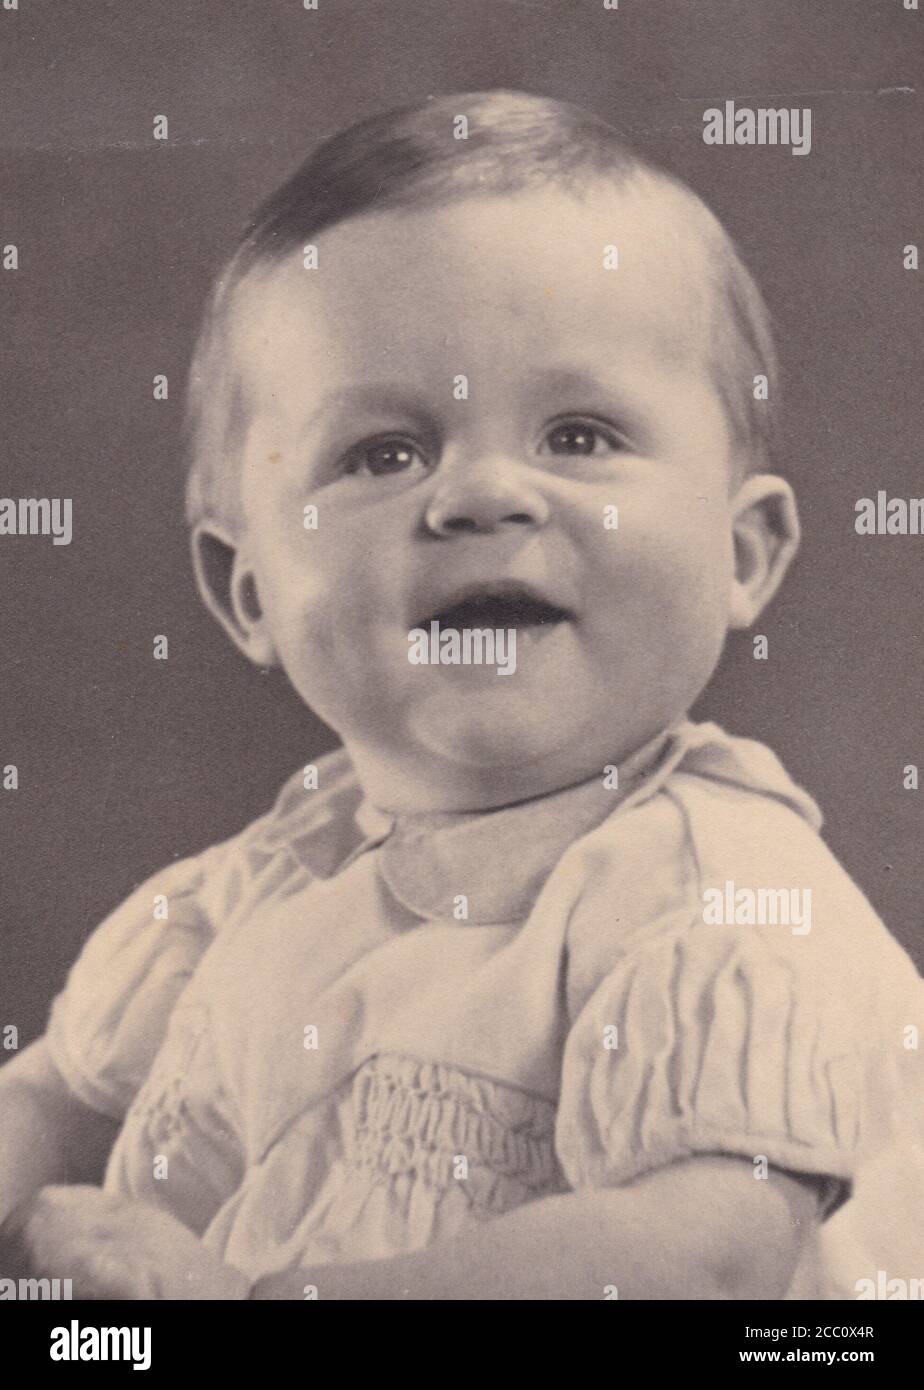 Vintage black and white photo of a cute baby 1940s Stock Photo